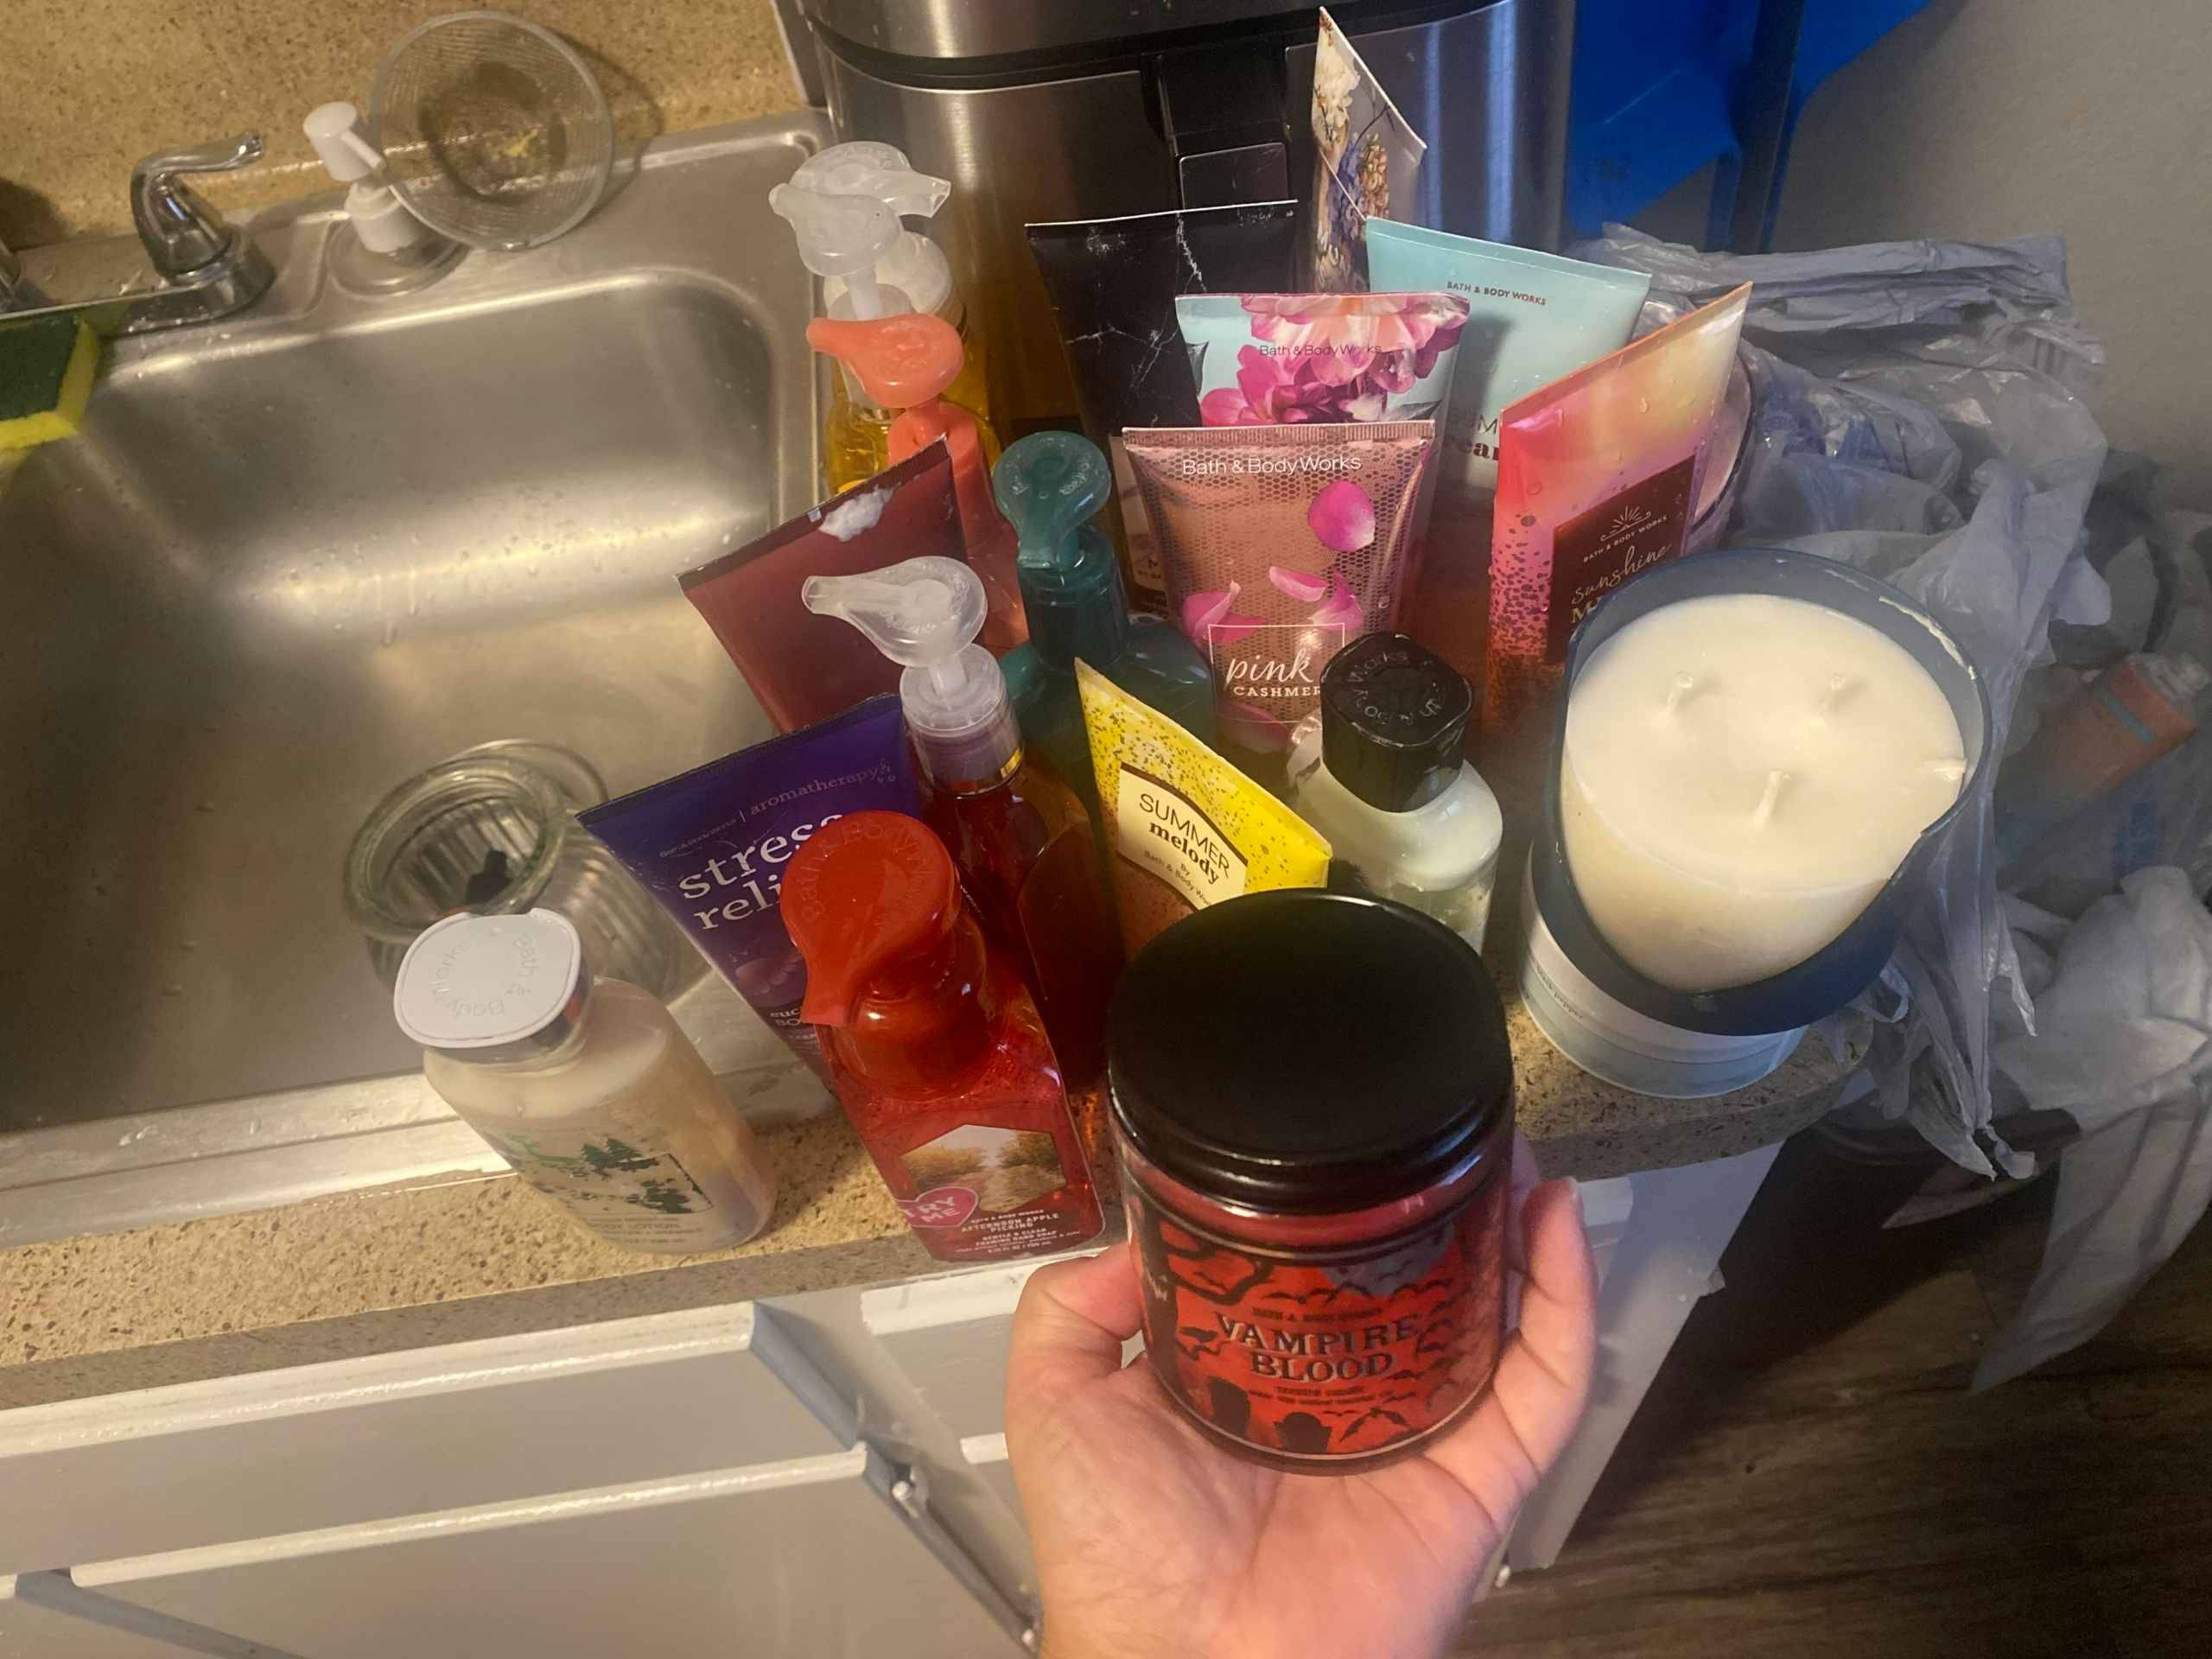 A collection of items retrieved from a Bath & Body Works dumpster